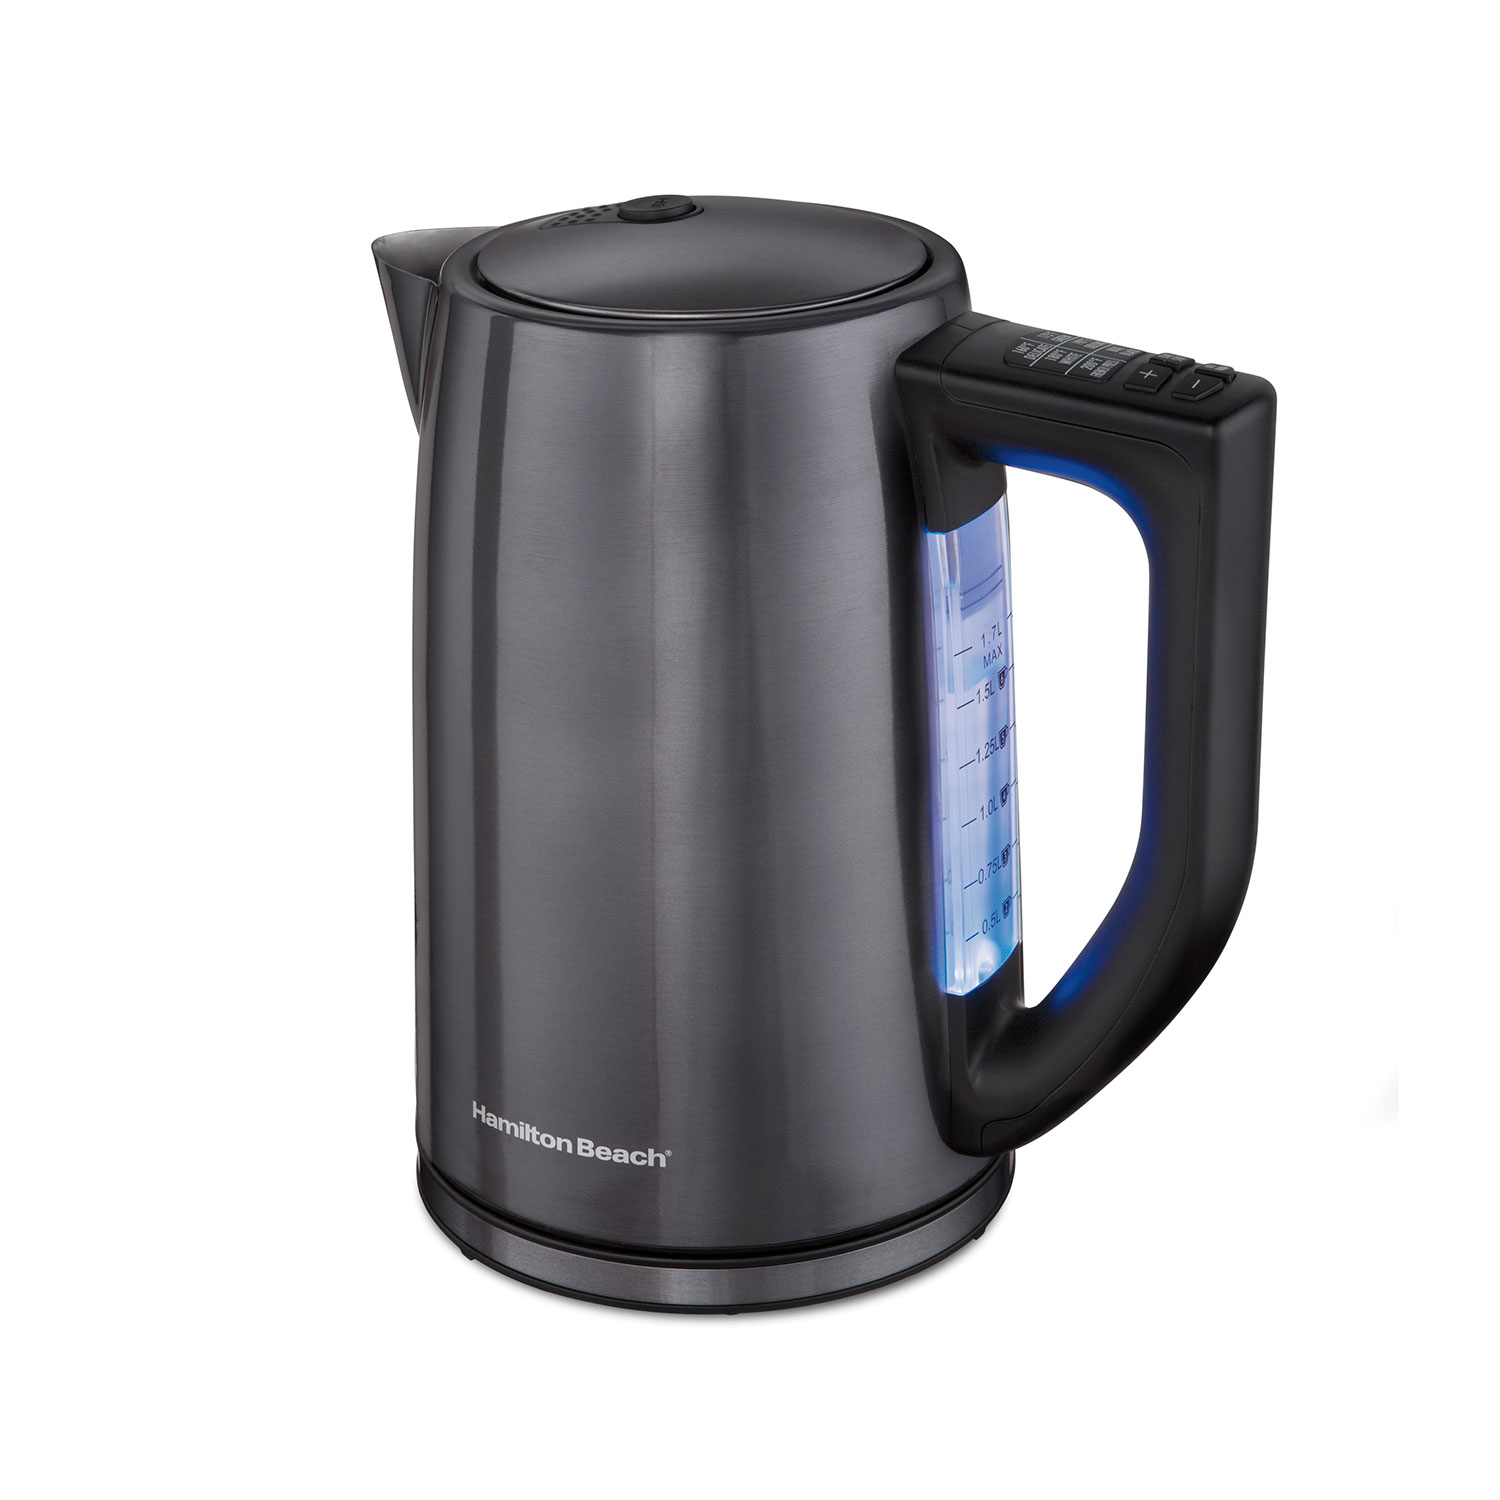 Black Stainless 1.7 Liter Variable Temperature Kettle (41027)